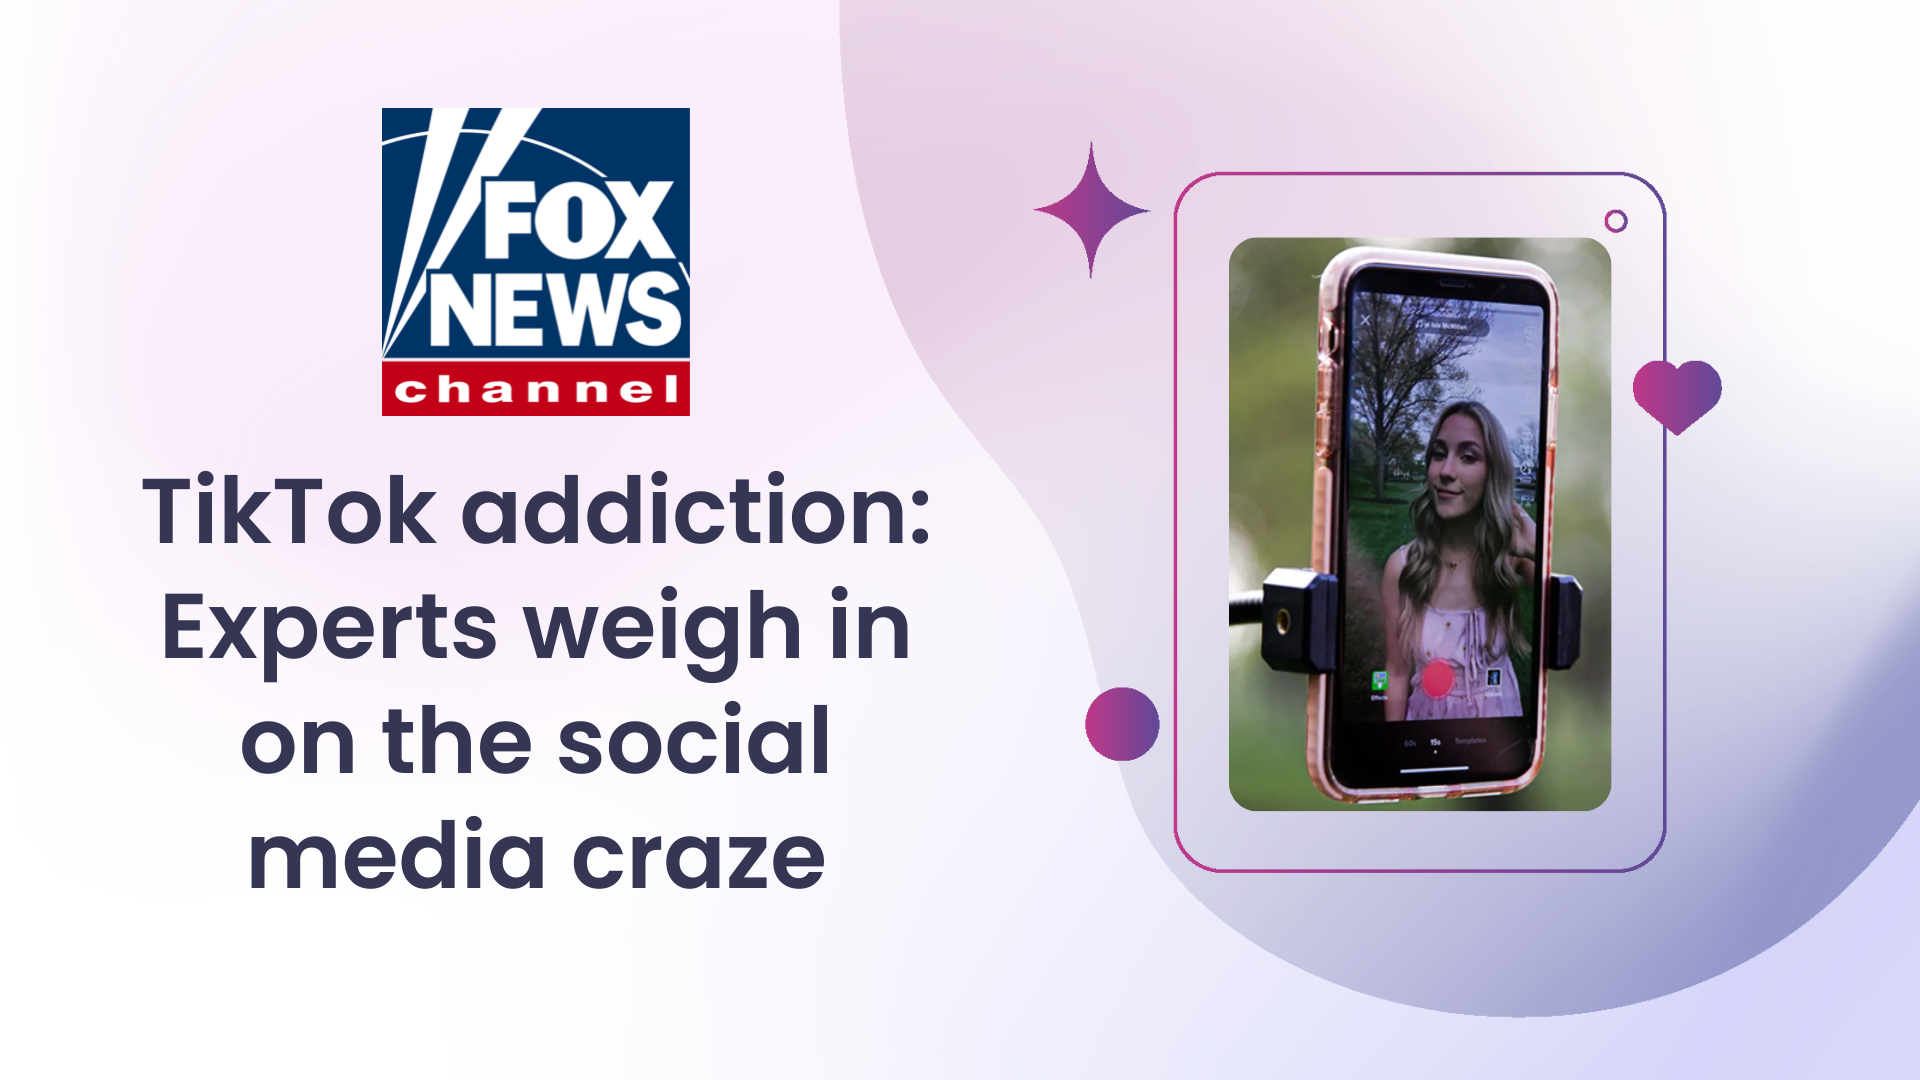 TikTok addiction: Experts weigh in on the social media craze